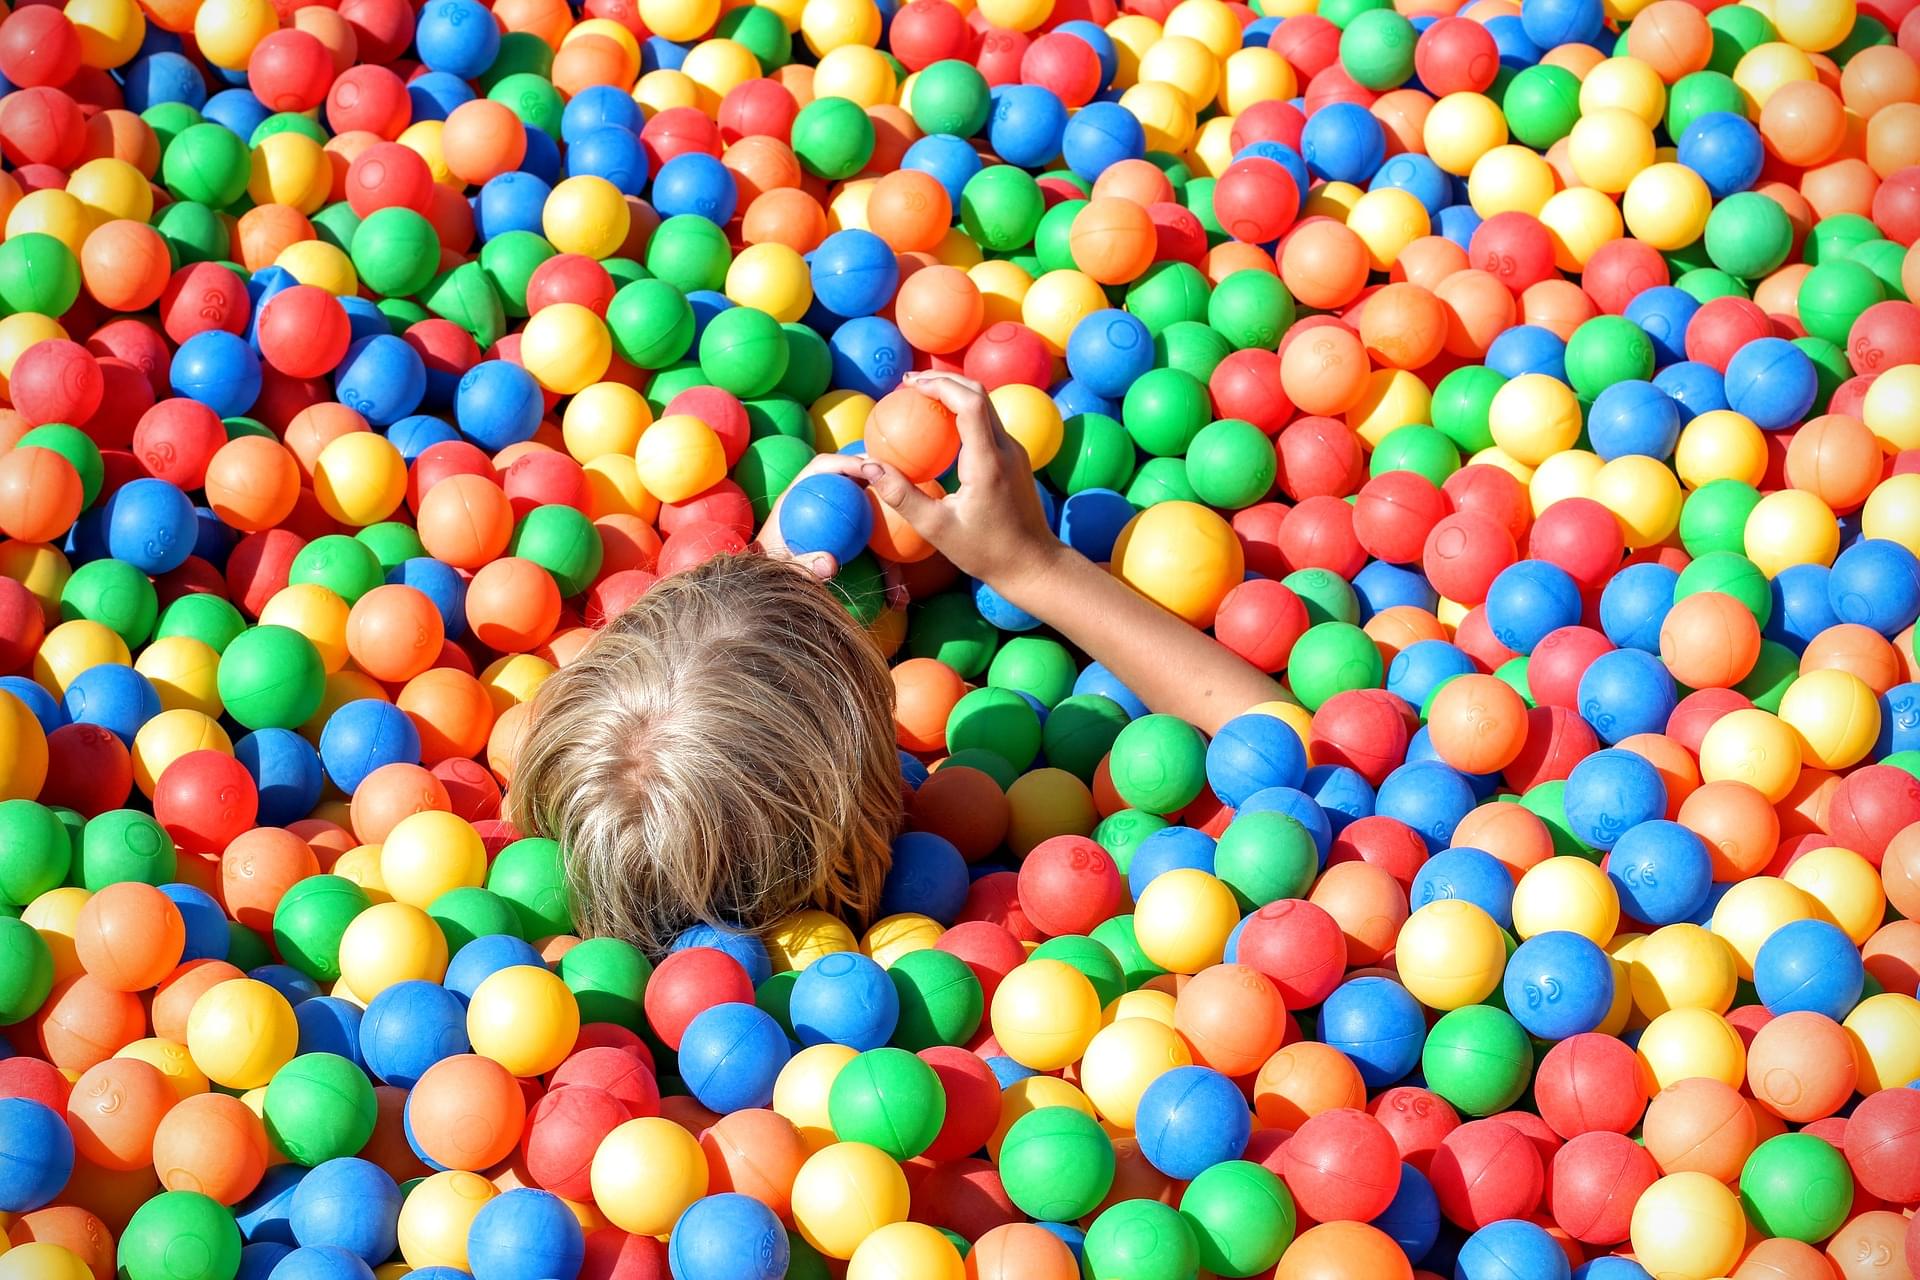 New Study Confirms That Ball Pits Are Extremely Disgusting